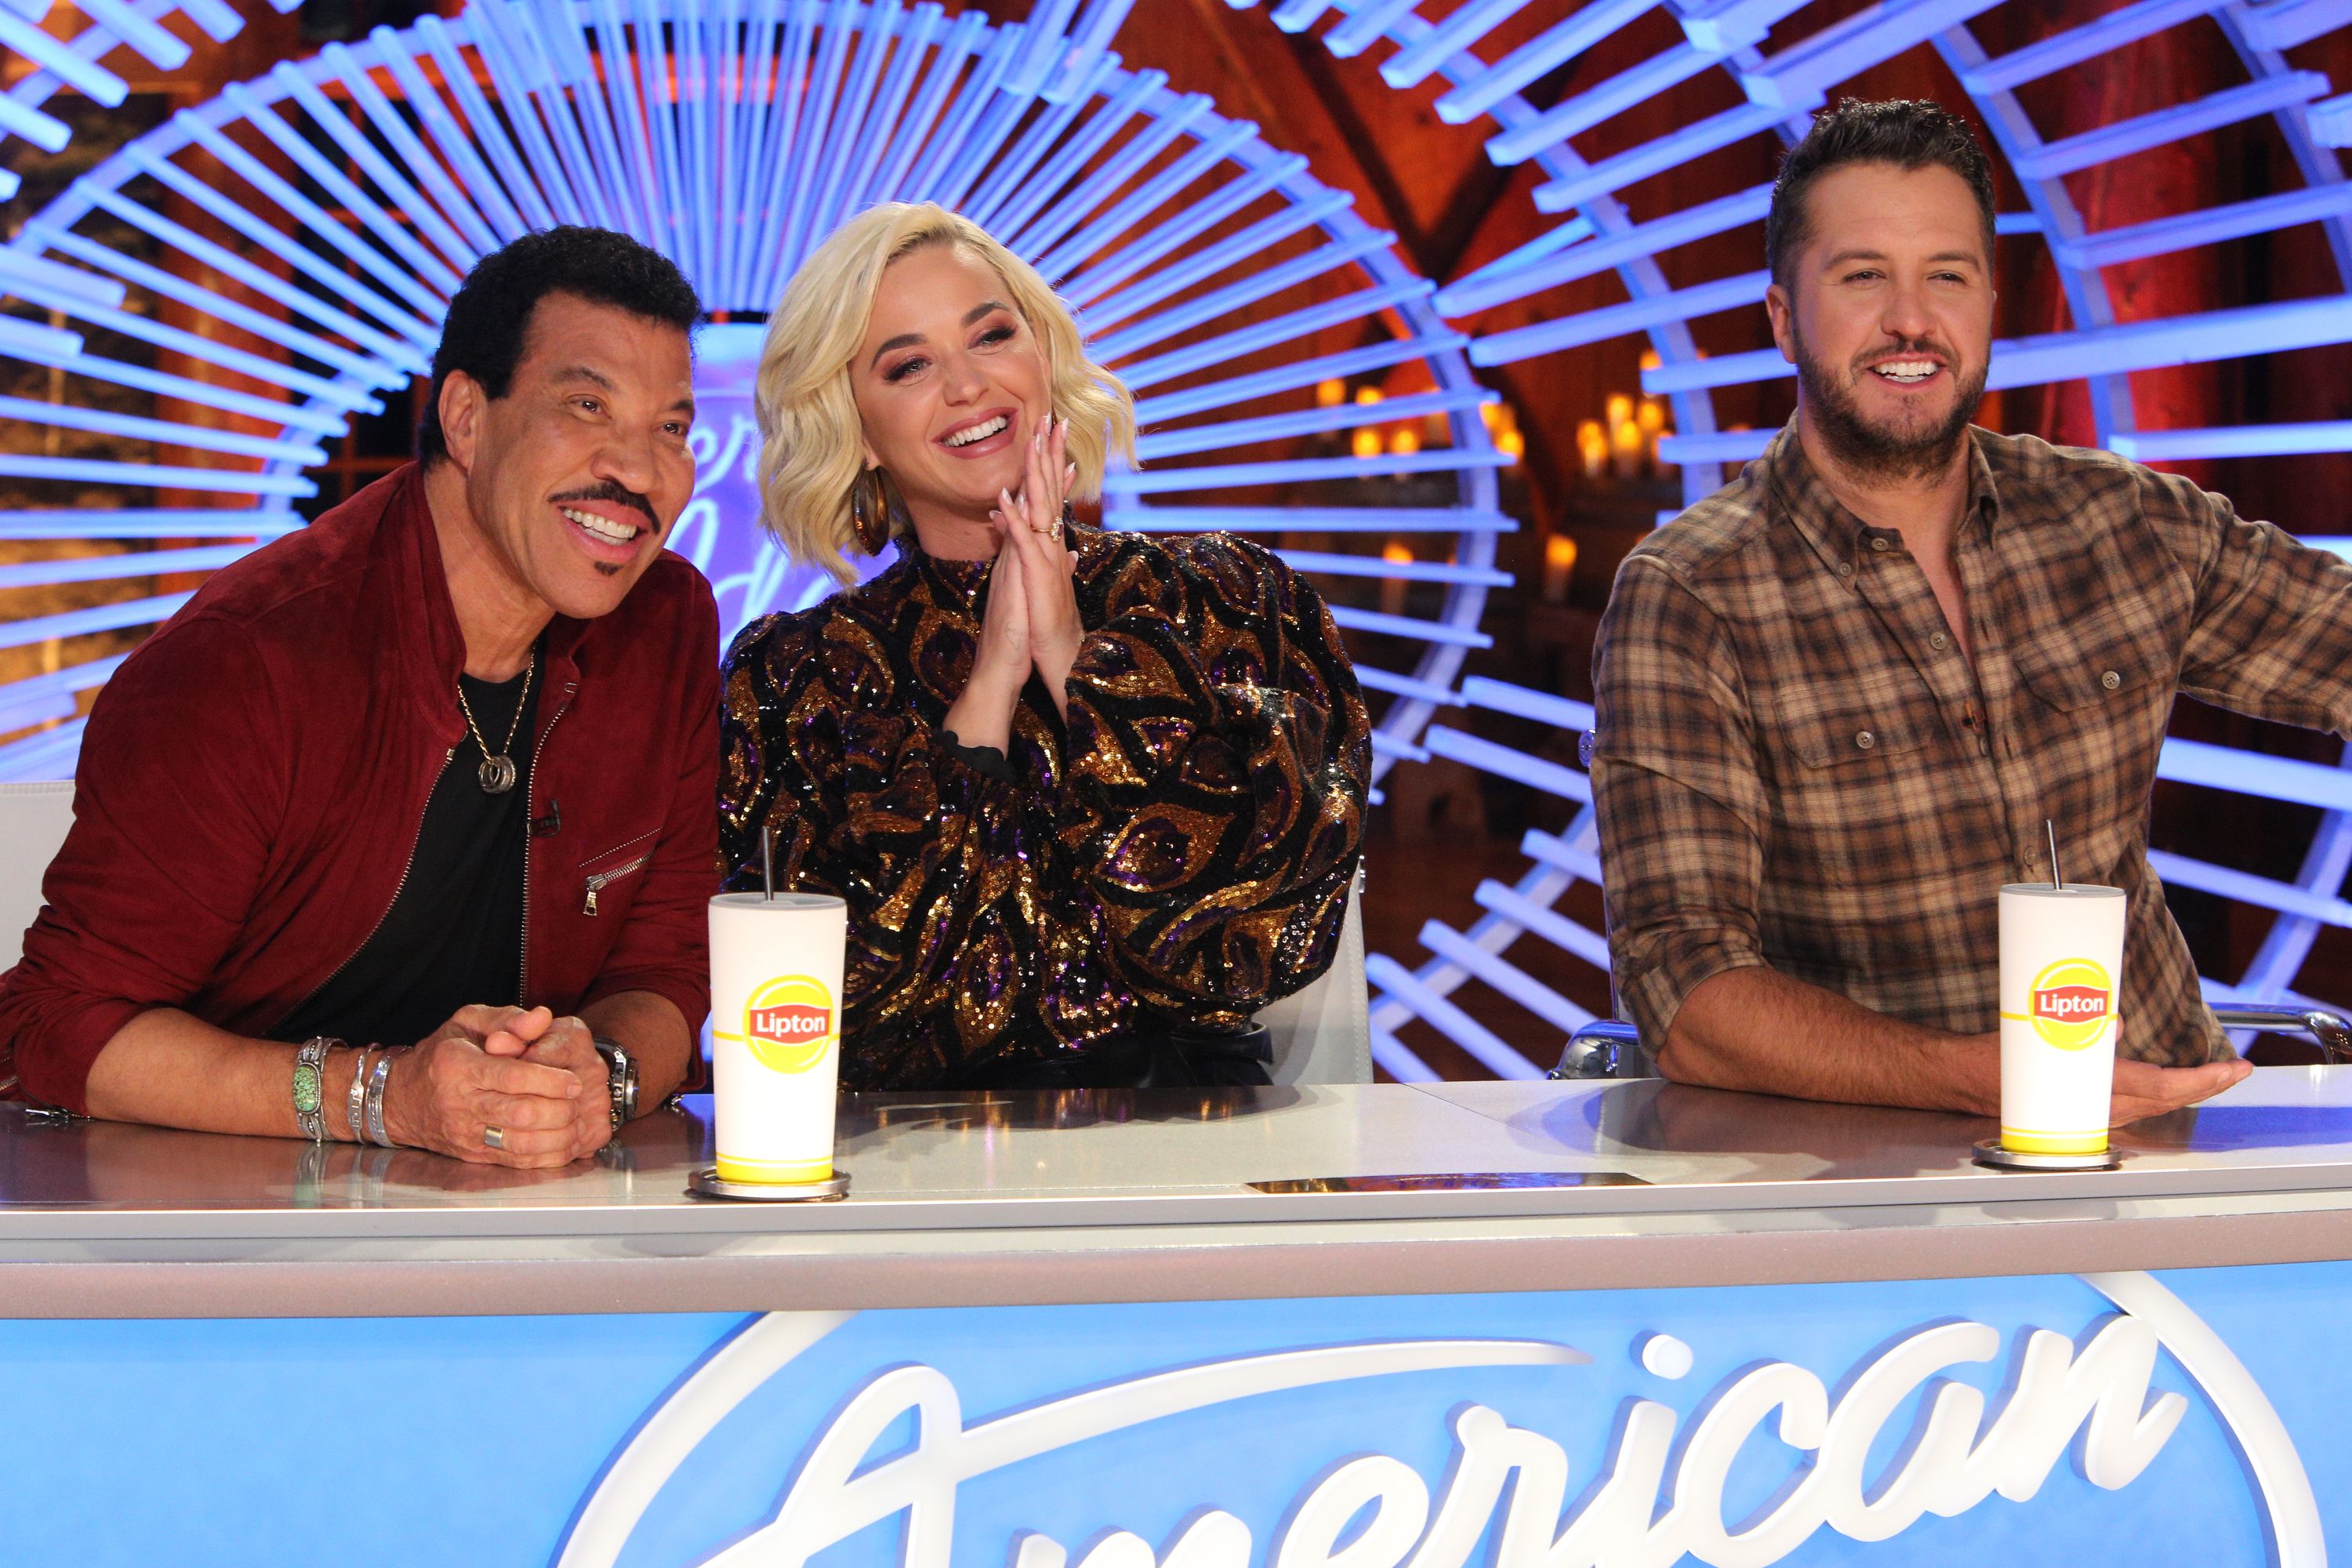 Lionel Richie, Katy Perry, and Luke Bryan on the set of "American Idol" | Photo: Getty Images